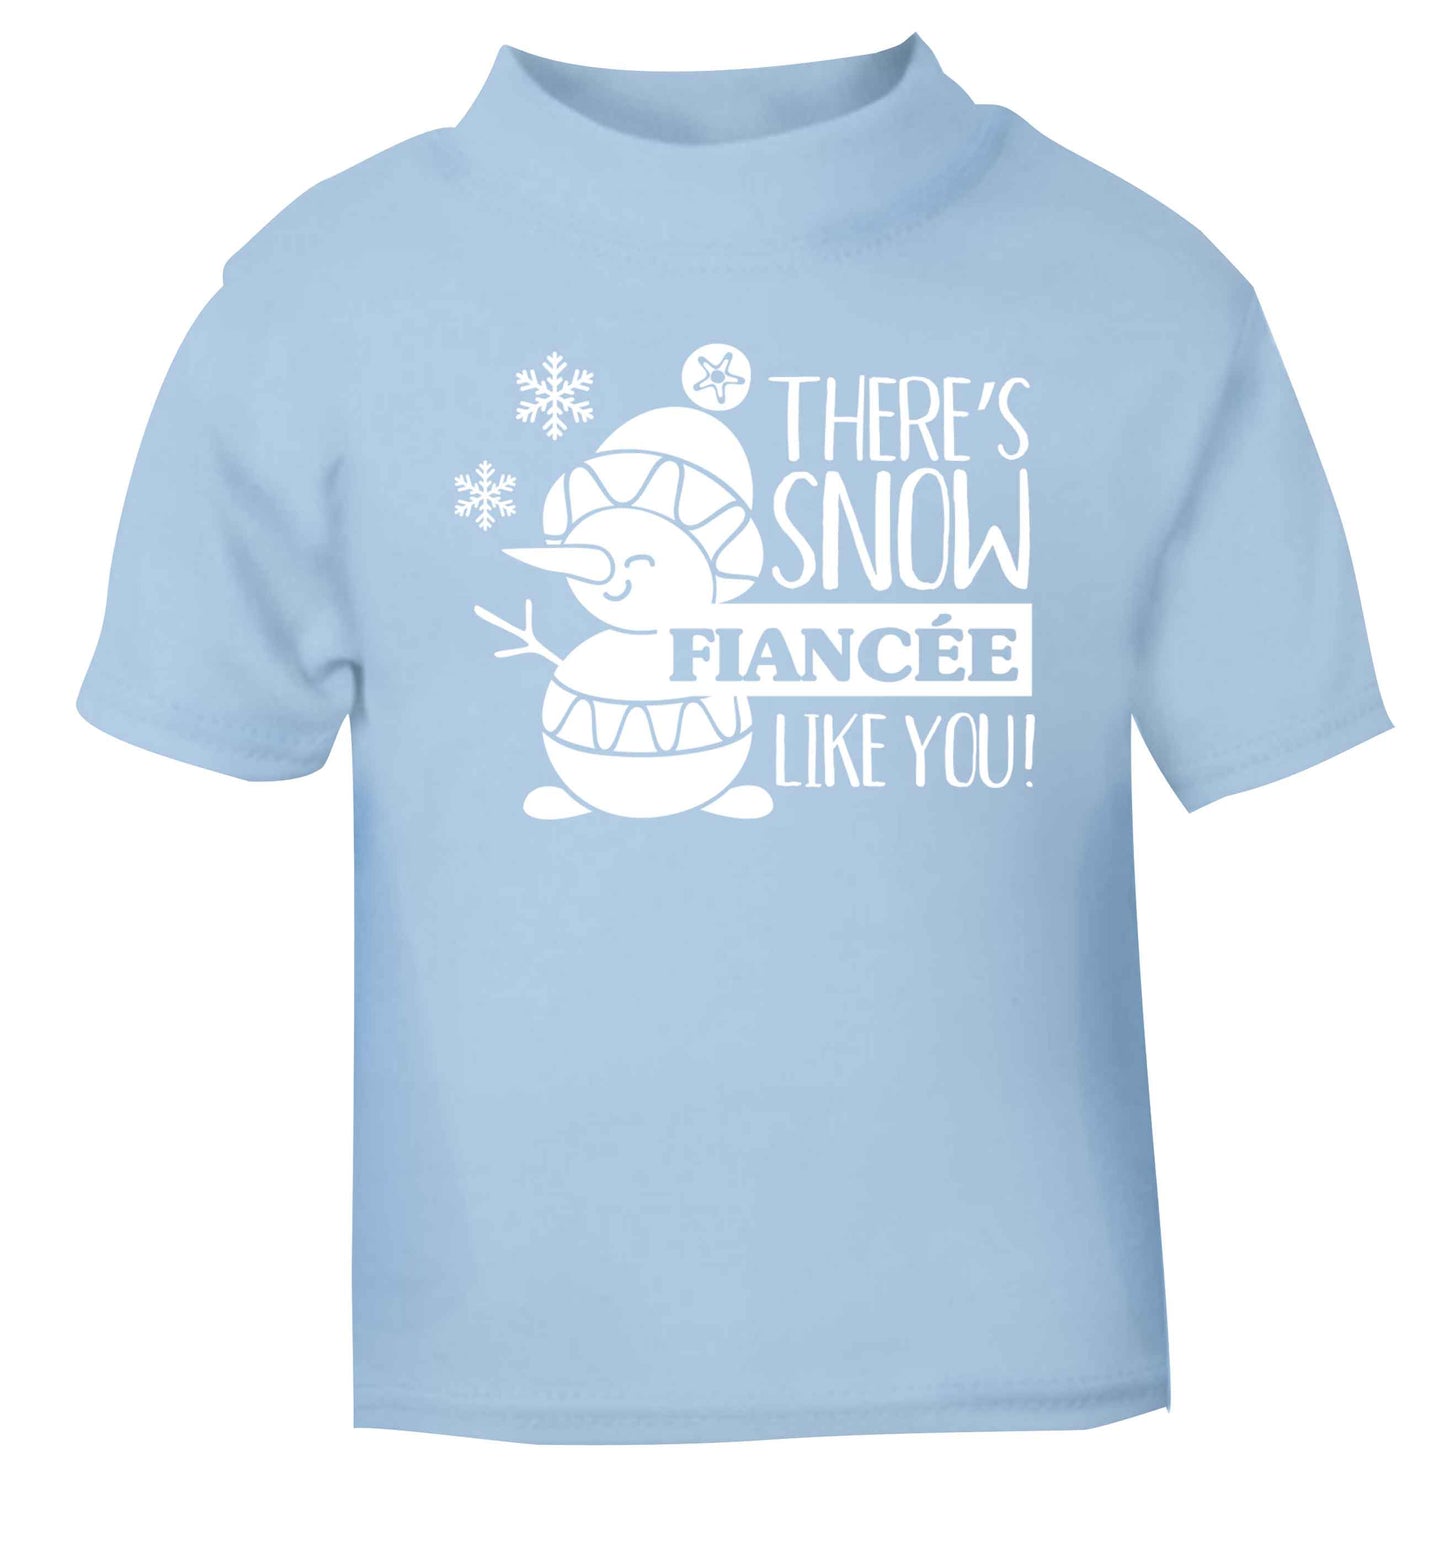 There's snow fiancee like you light blue baby toddler Tshirt 2 Years